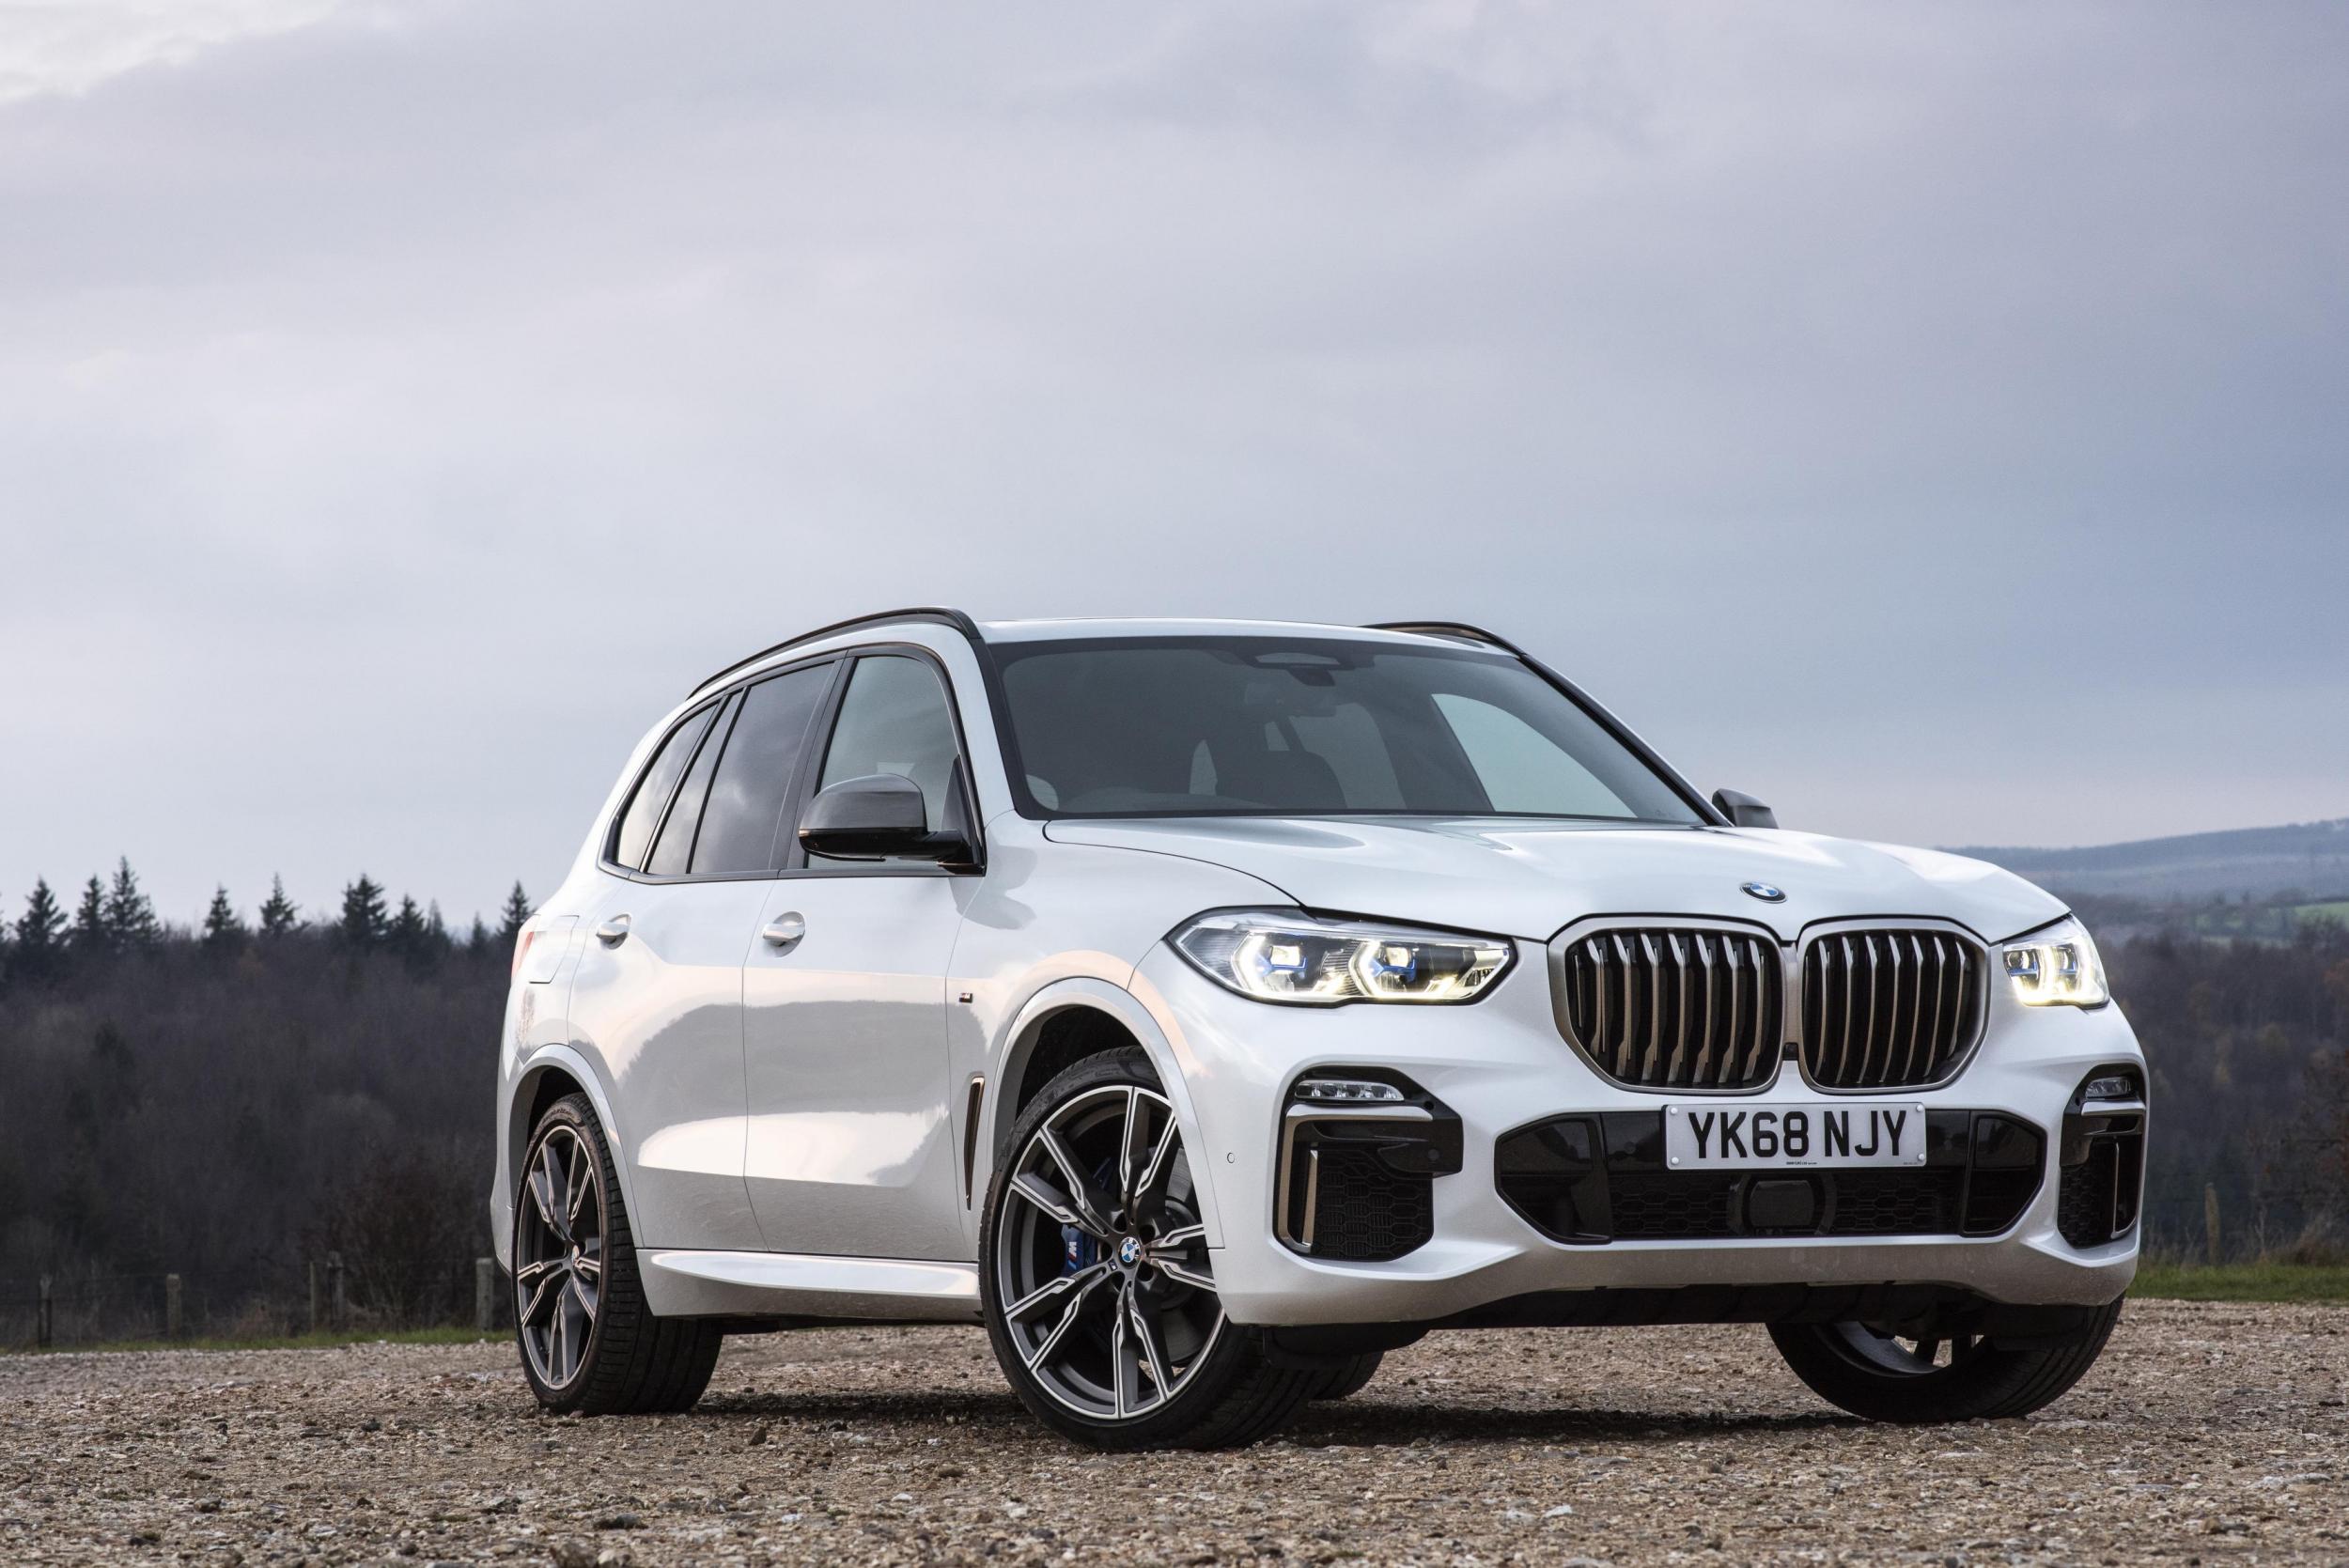 The BMW X5 was the most stolen vehicle in 2018